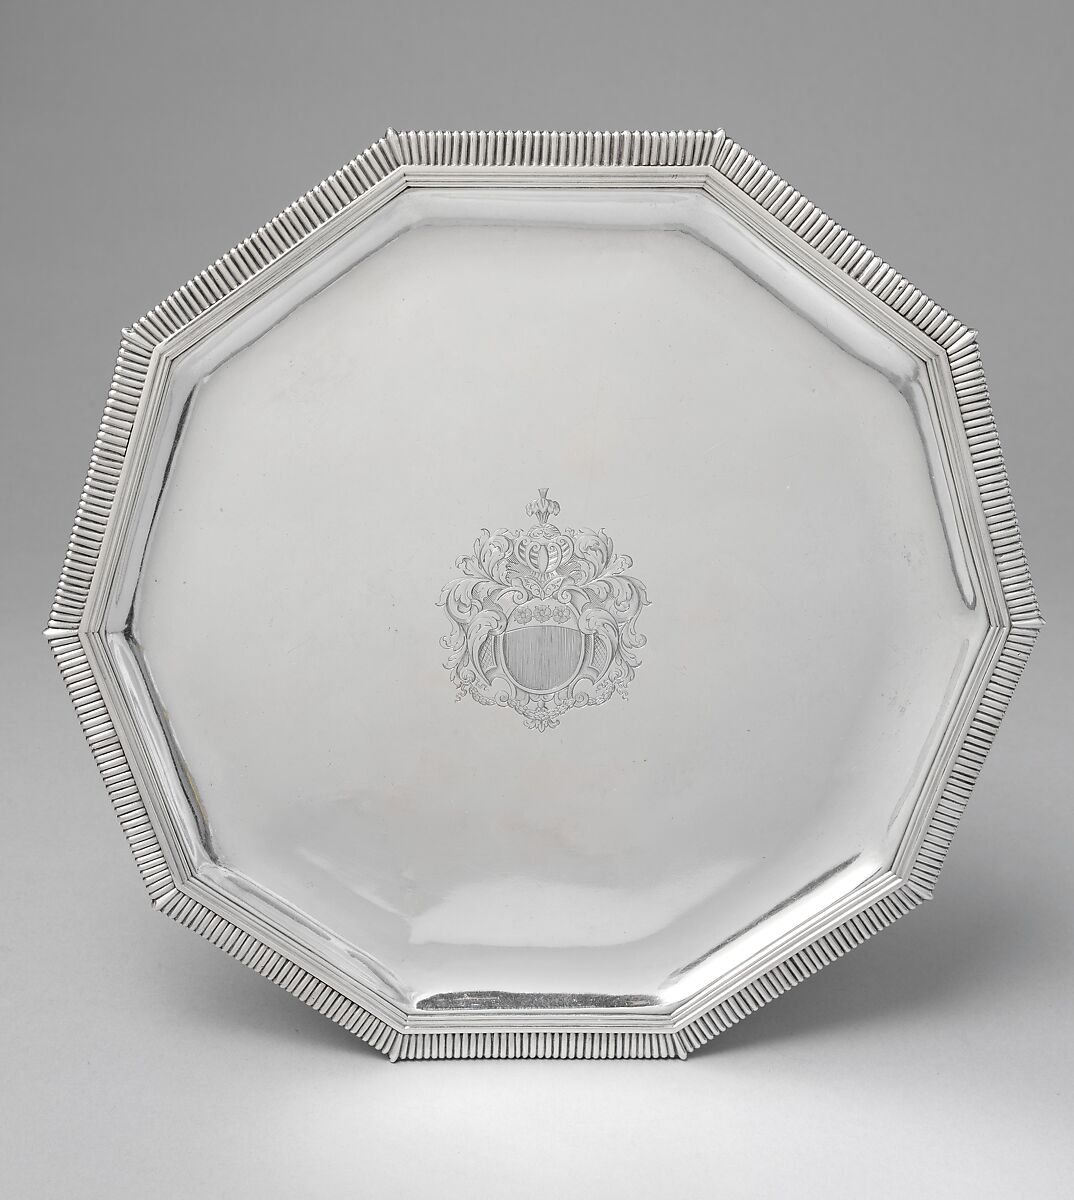 Salver, Attributed to Jean-Joseph Giraud (master 1707, retired 1751), Silver, French, Marseilles (Aix Mint) 